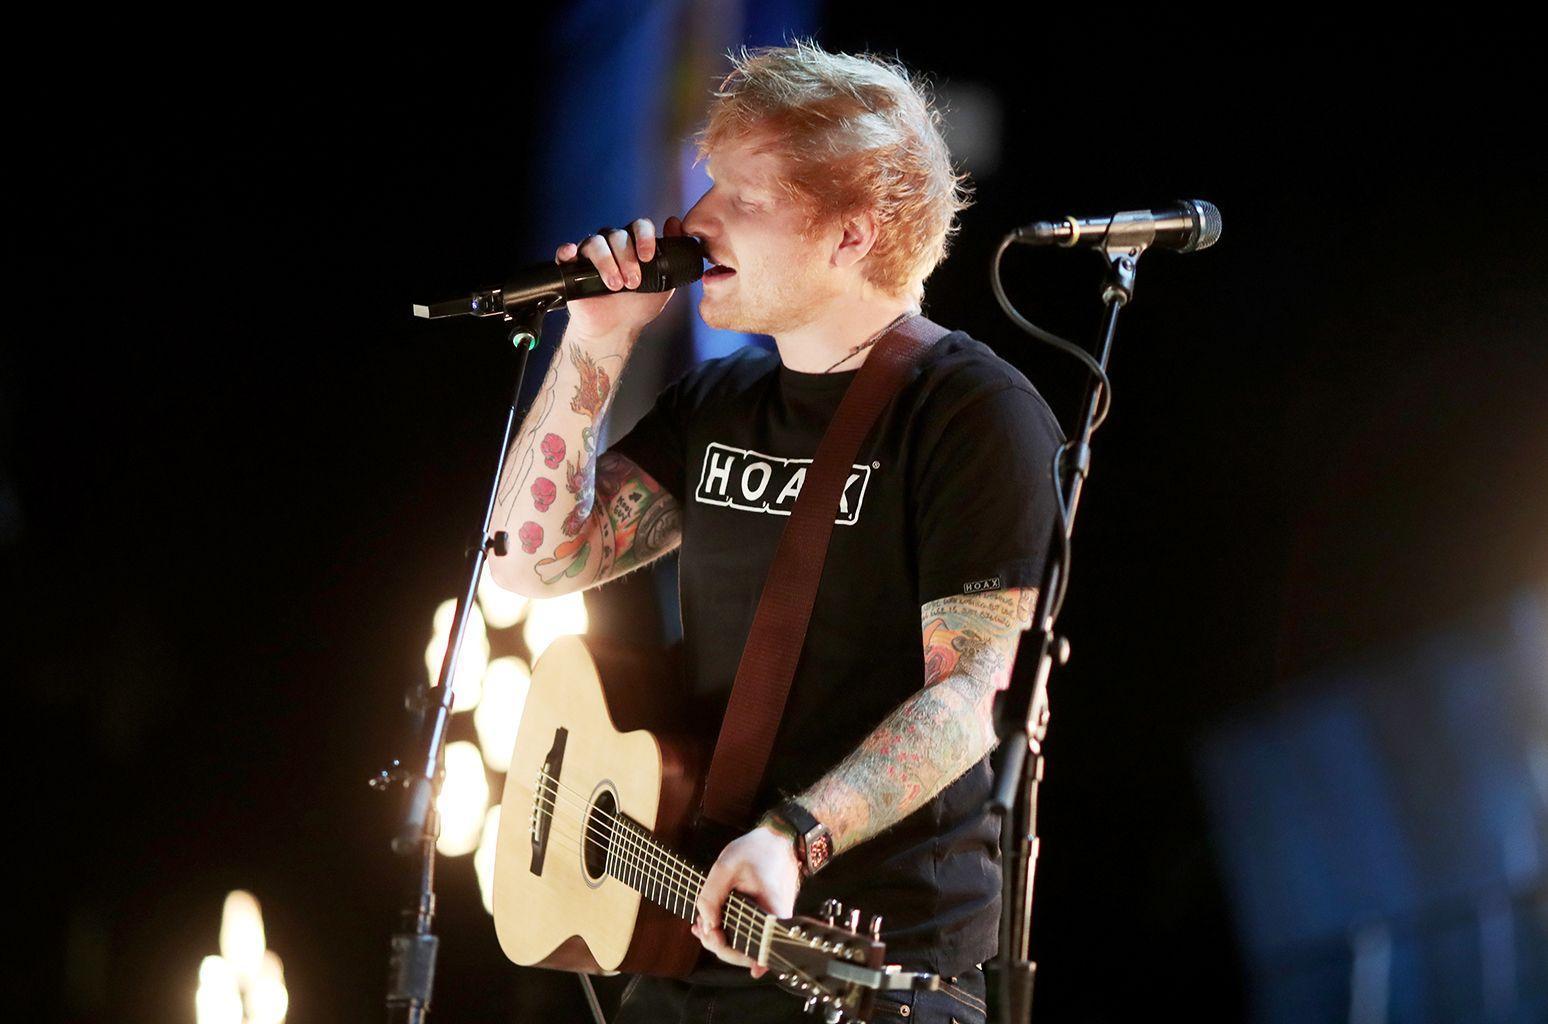 Ed Sheeran Reveals Next 'Divide' Track Will Be Released Friday